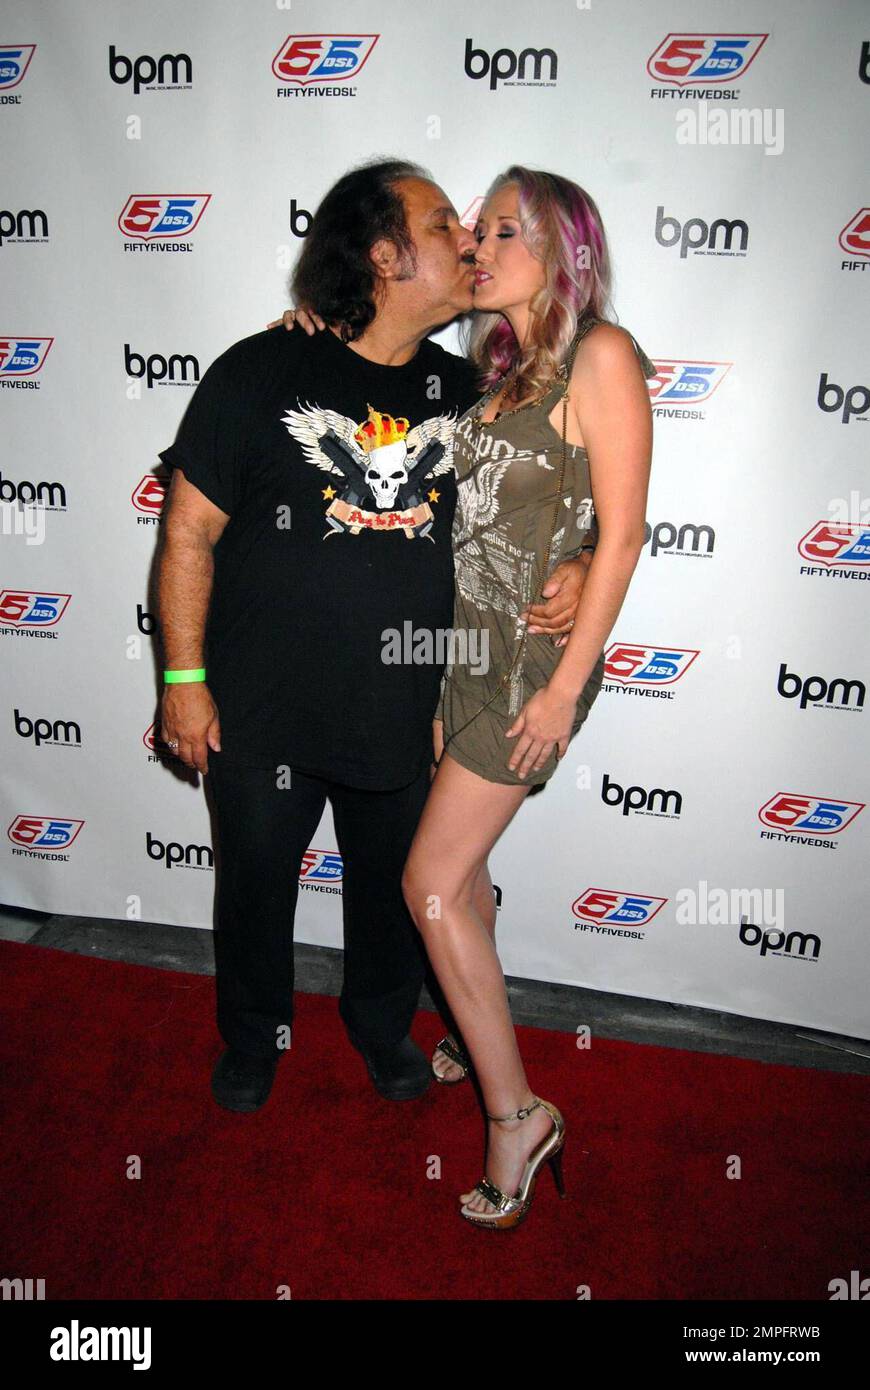 Ron Jeremy and Alana Evans attend the BPM Magazine 12th Anniversary party at the Avalon picture image